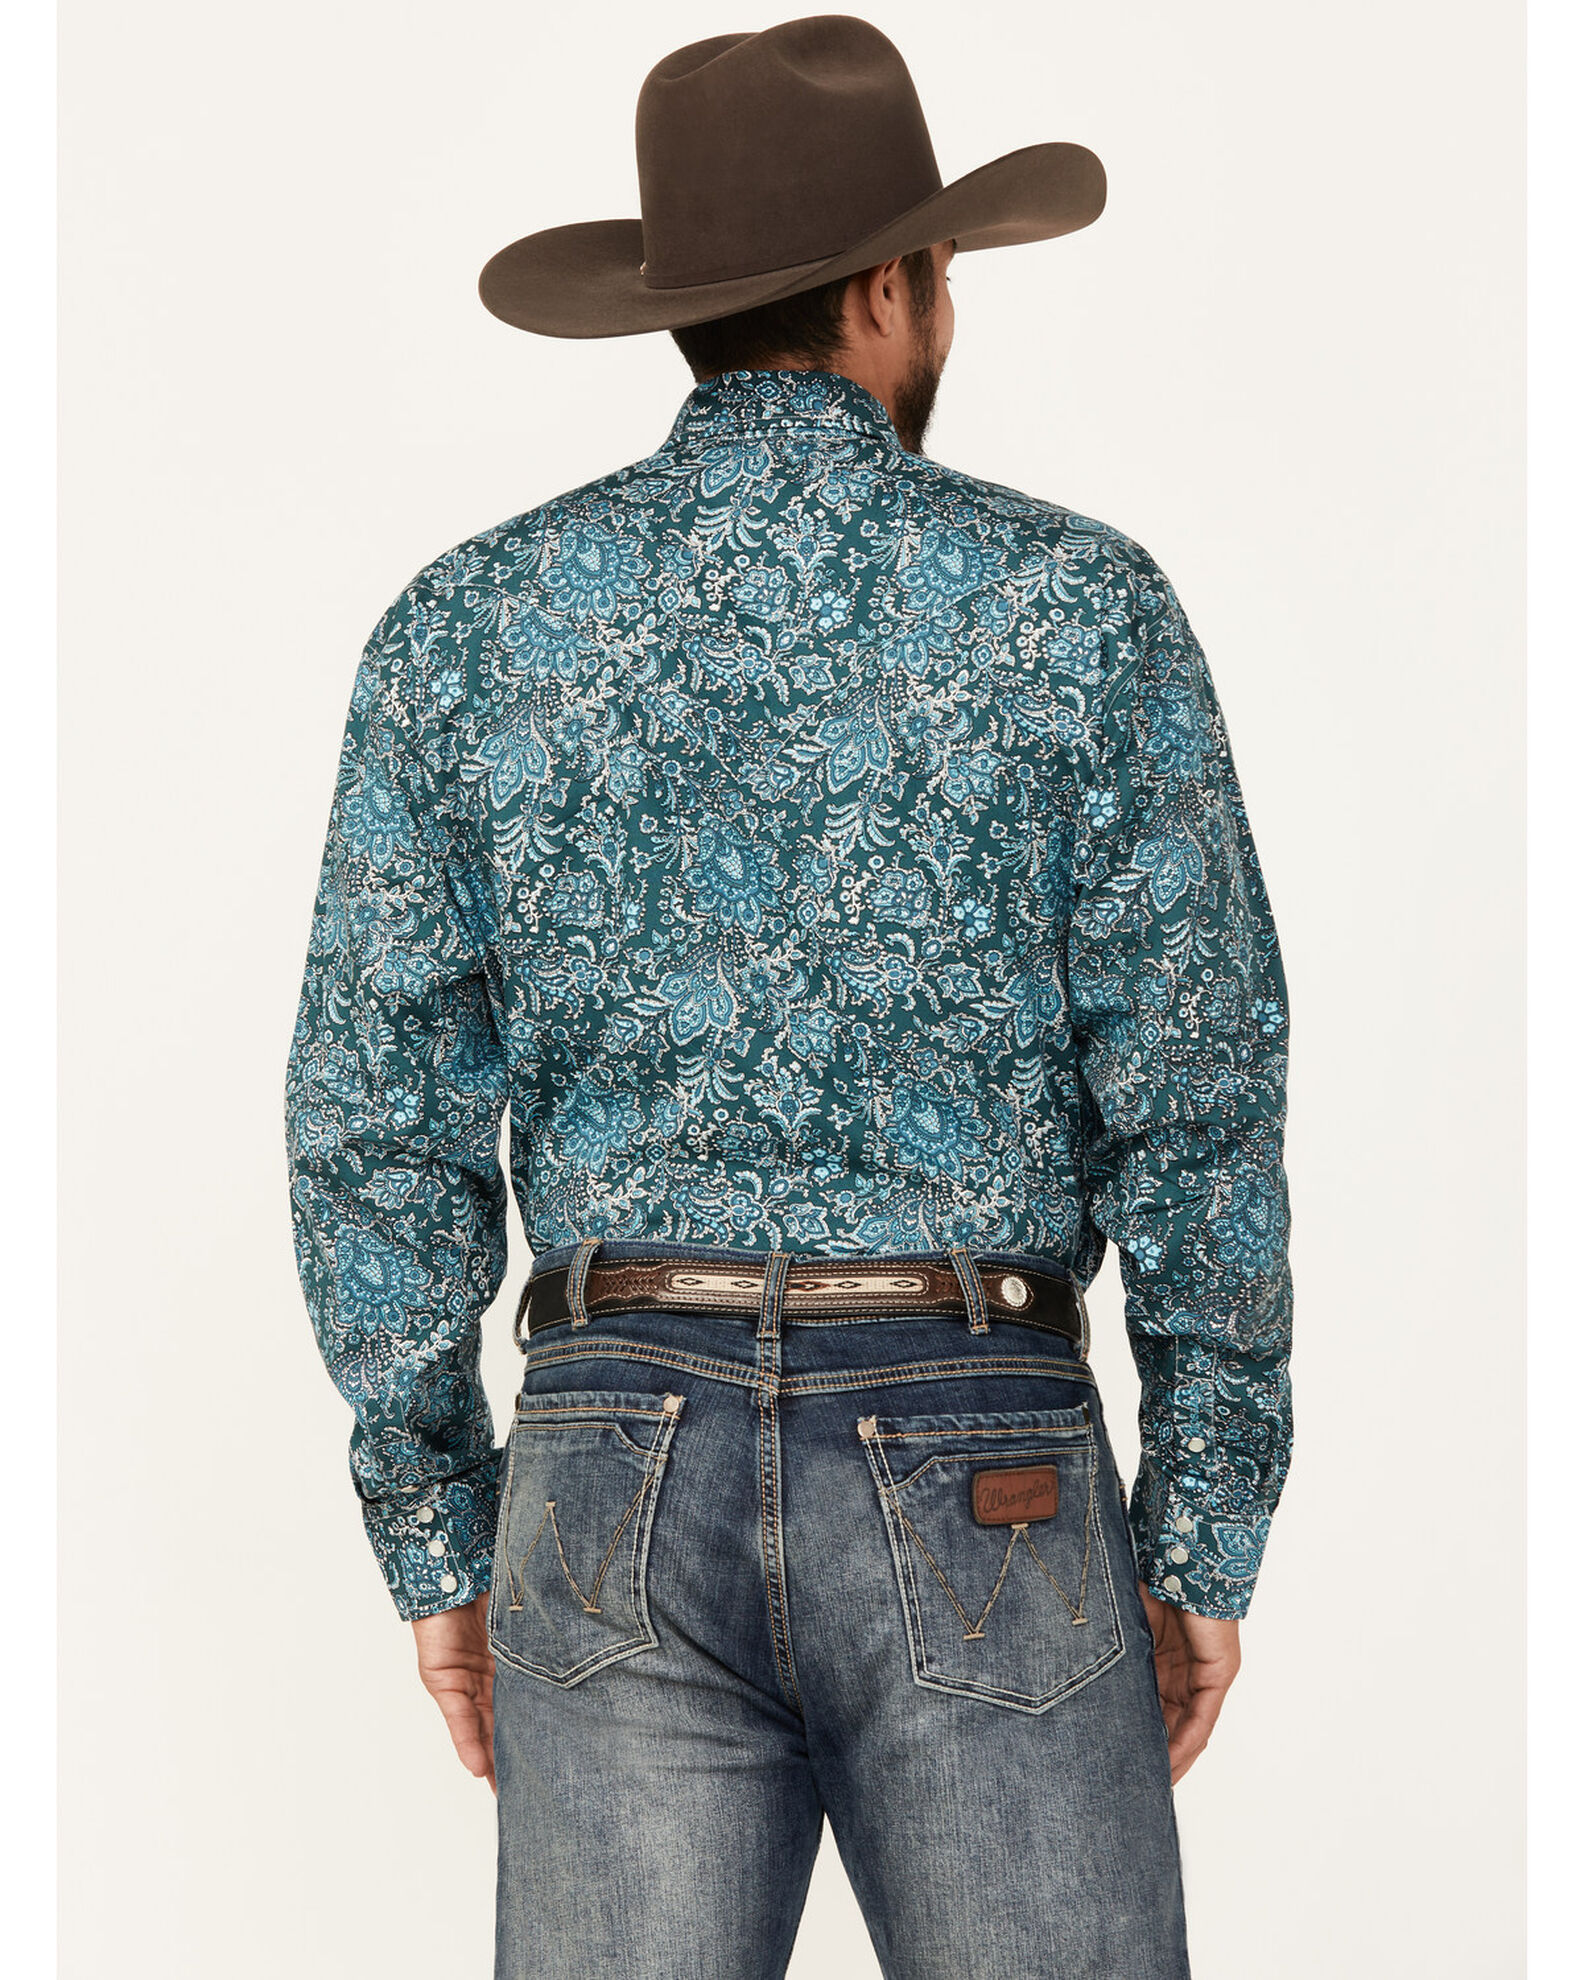 Pearl Snap Shirts: Western Wear for Anywhere – Pinto Ranch